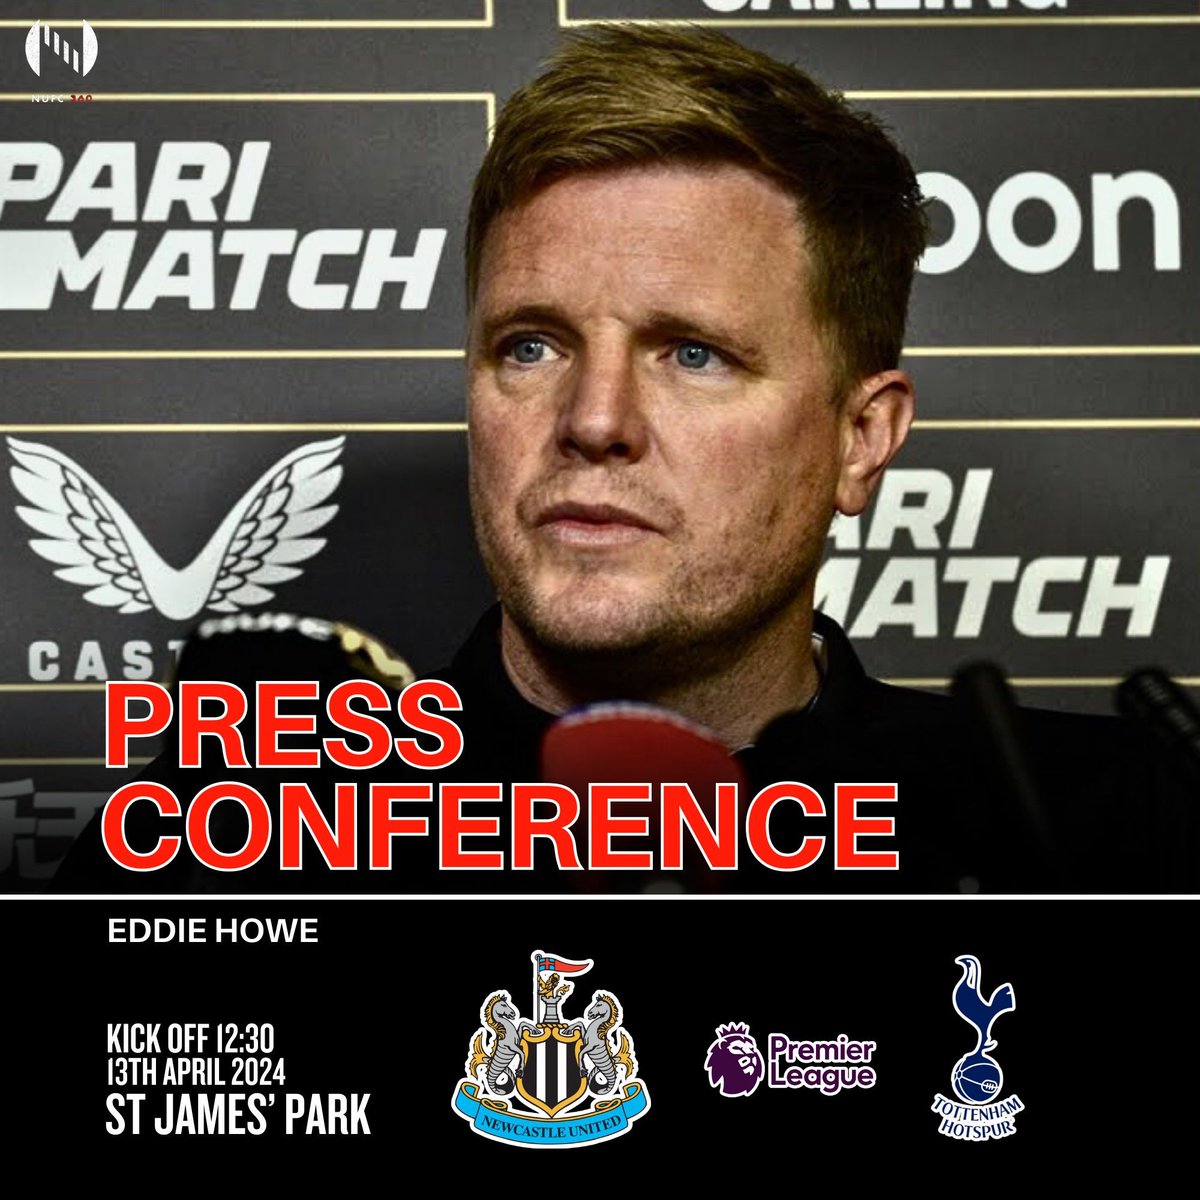 A round up of Eddie Howe’s pre match press conference for the game against Spurs tomorrow. ❌ Willock out for tomorrow & may miss the rest of the season. ❓ Hall has not trained and is a doubt for tomorrow. 🏴󠁧󠁢󠁥󠁮󠁧󠁿 Tino progress and should be back for Palace. #NUFC